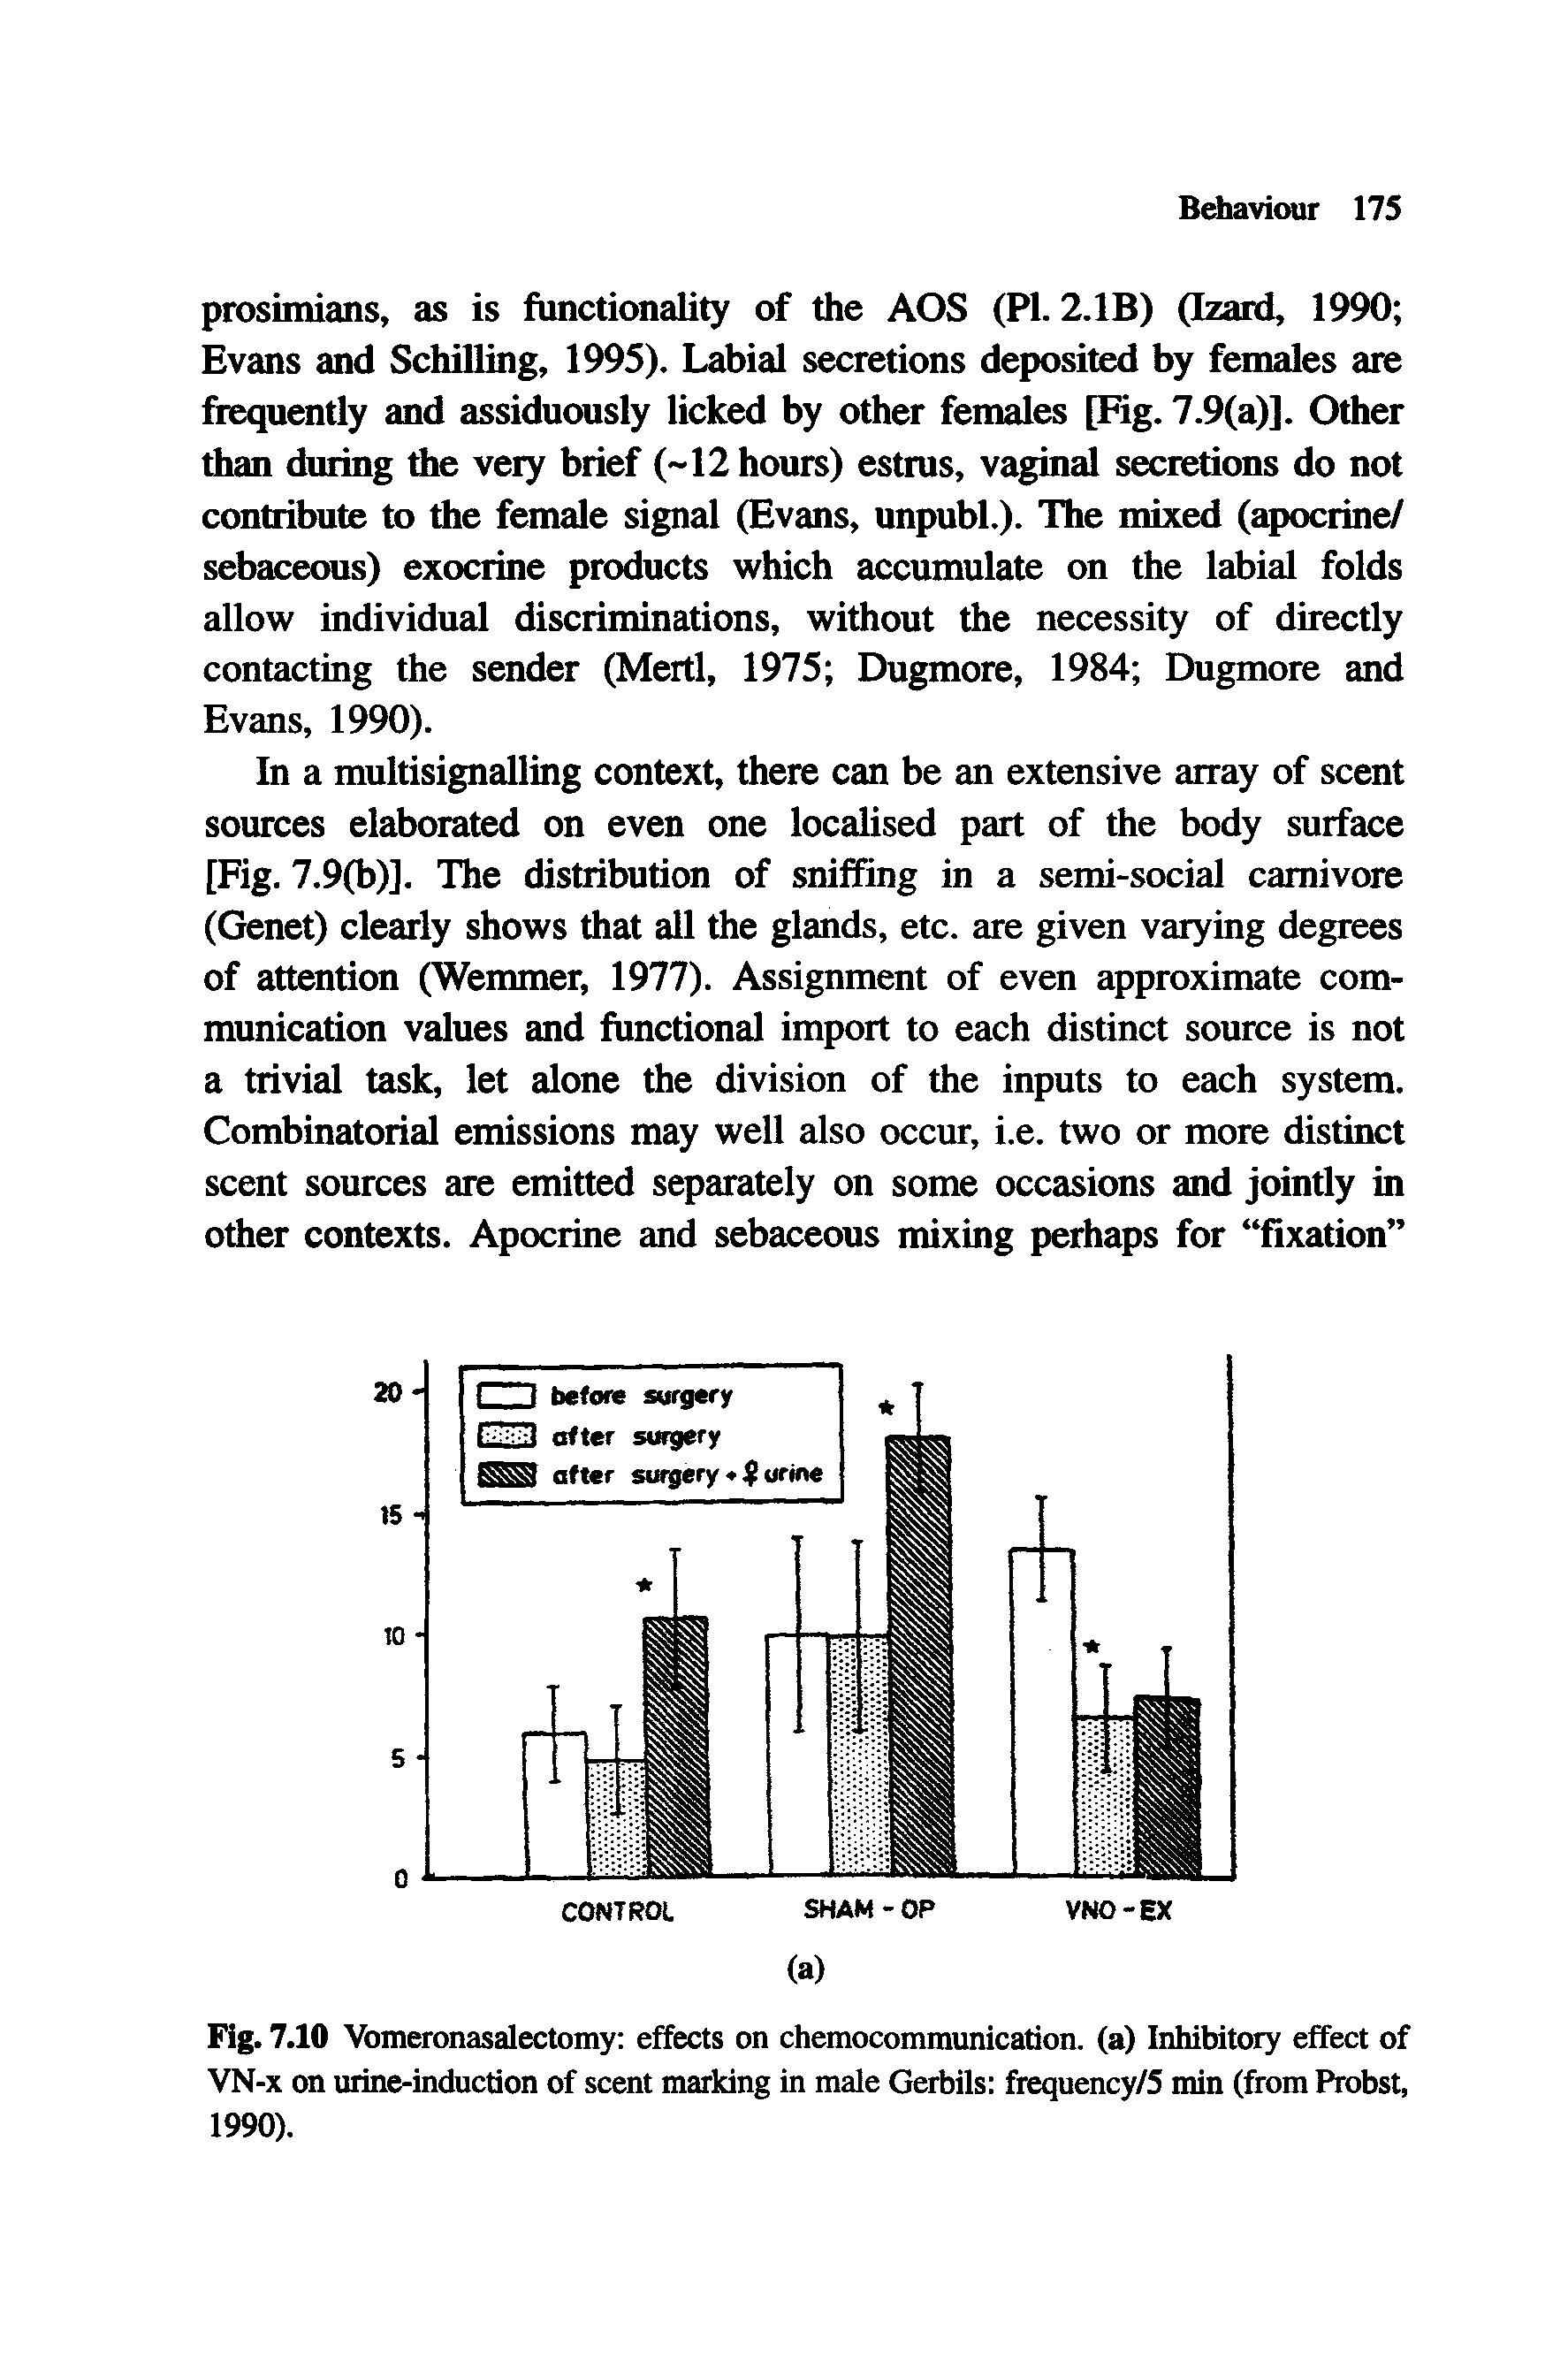 Fig. 7.10 Vomeronasalectomy effects on chemocommunication. (a) Inhibitory effect of VN-x on urine-induction of scent marking in male Gerbils frequency/5 min (from Probst, 1990).